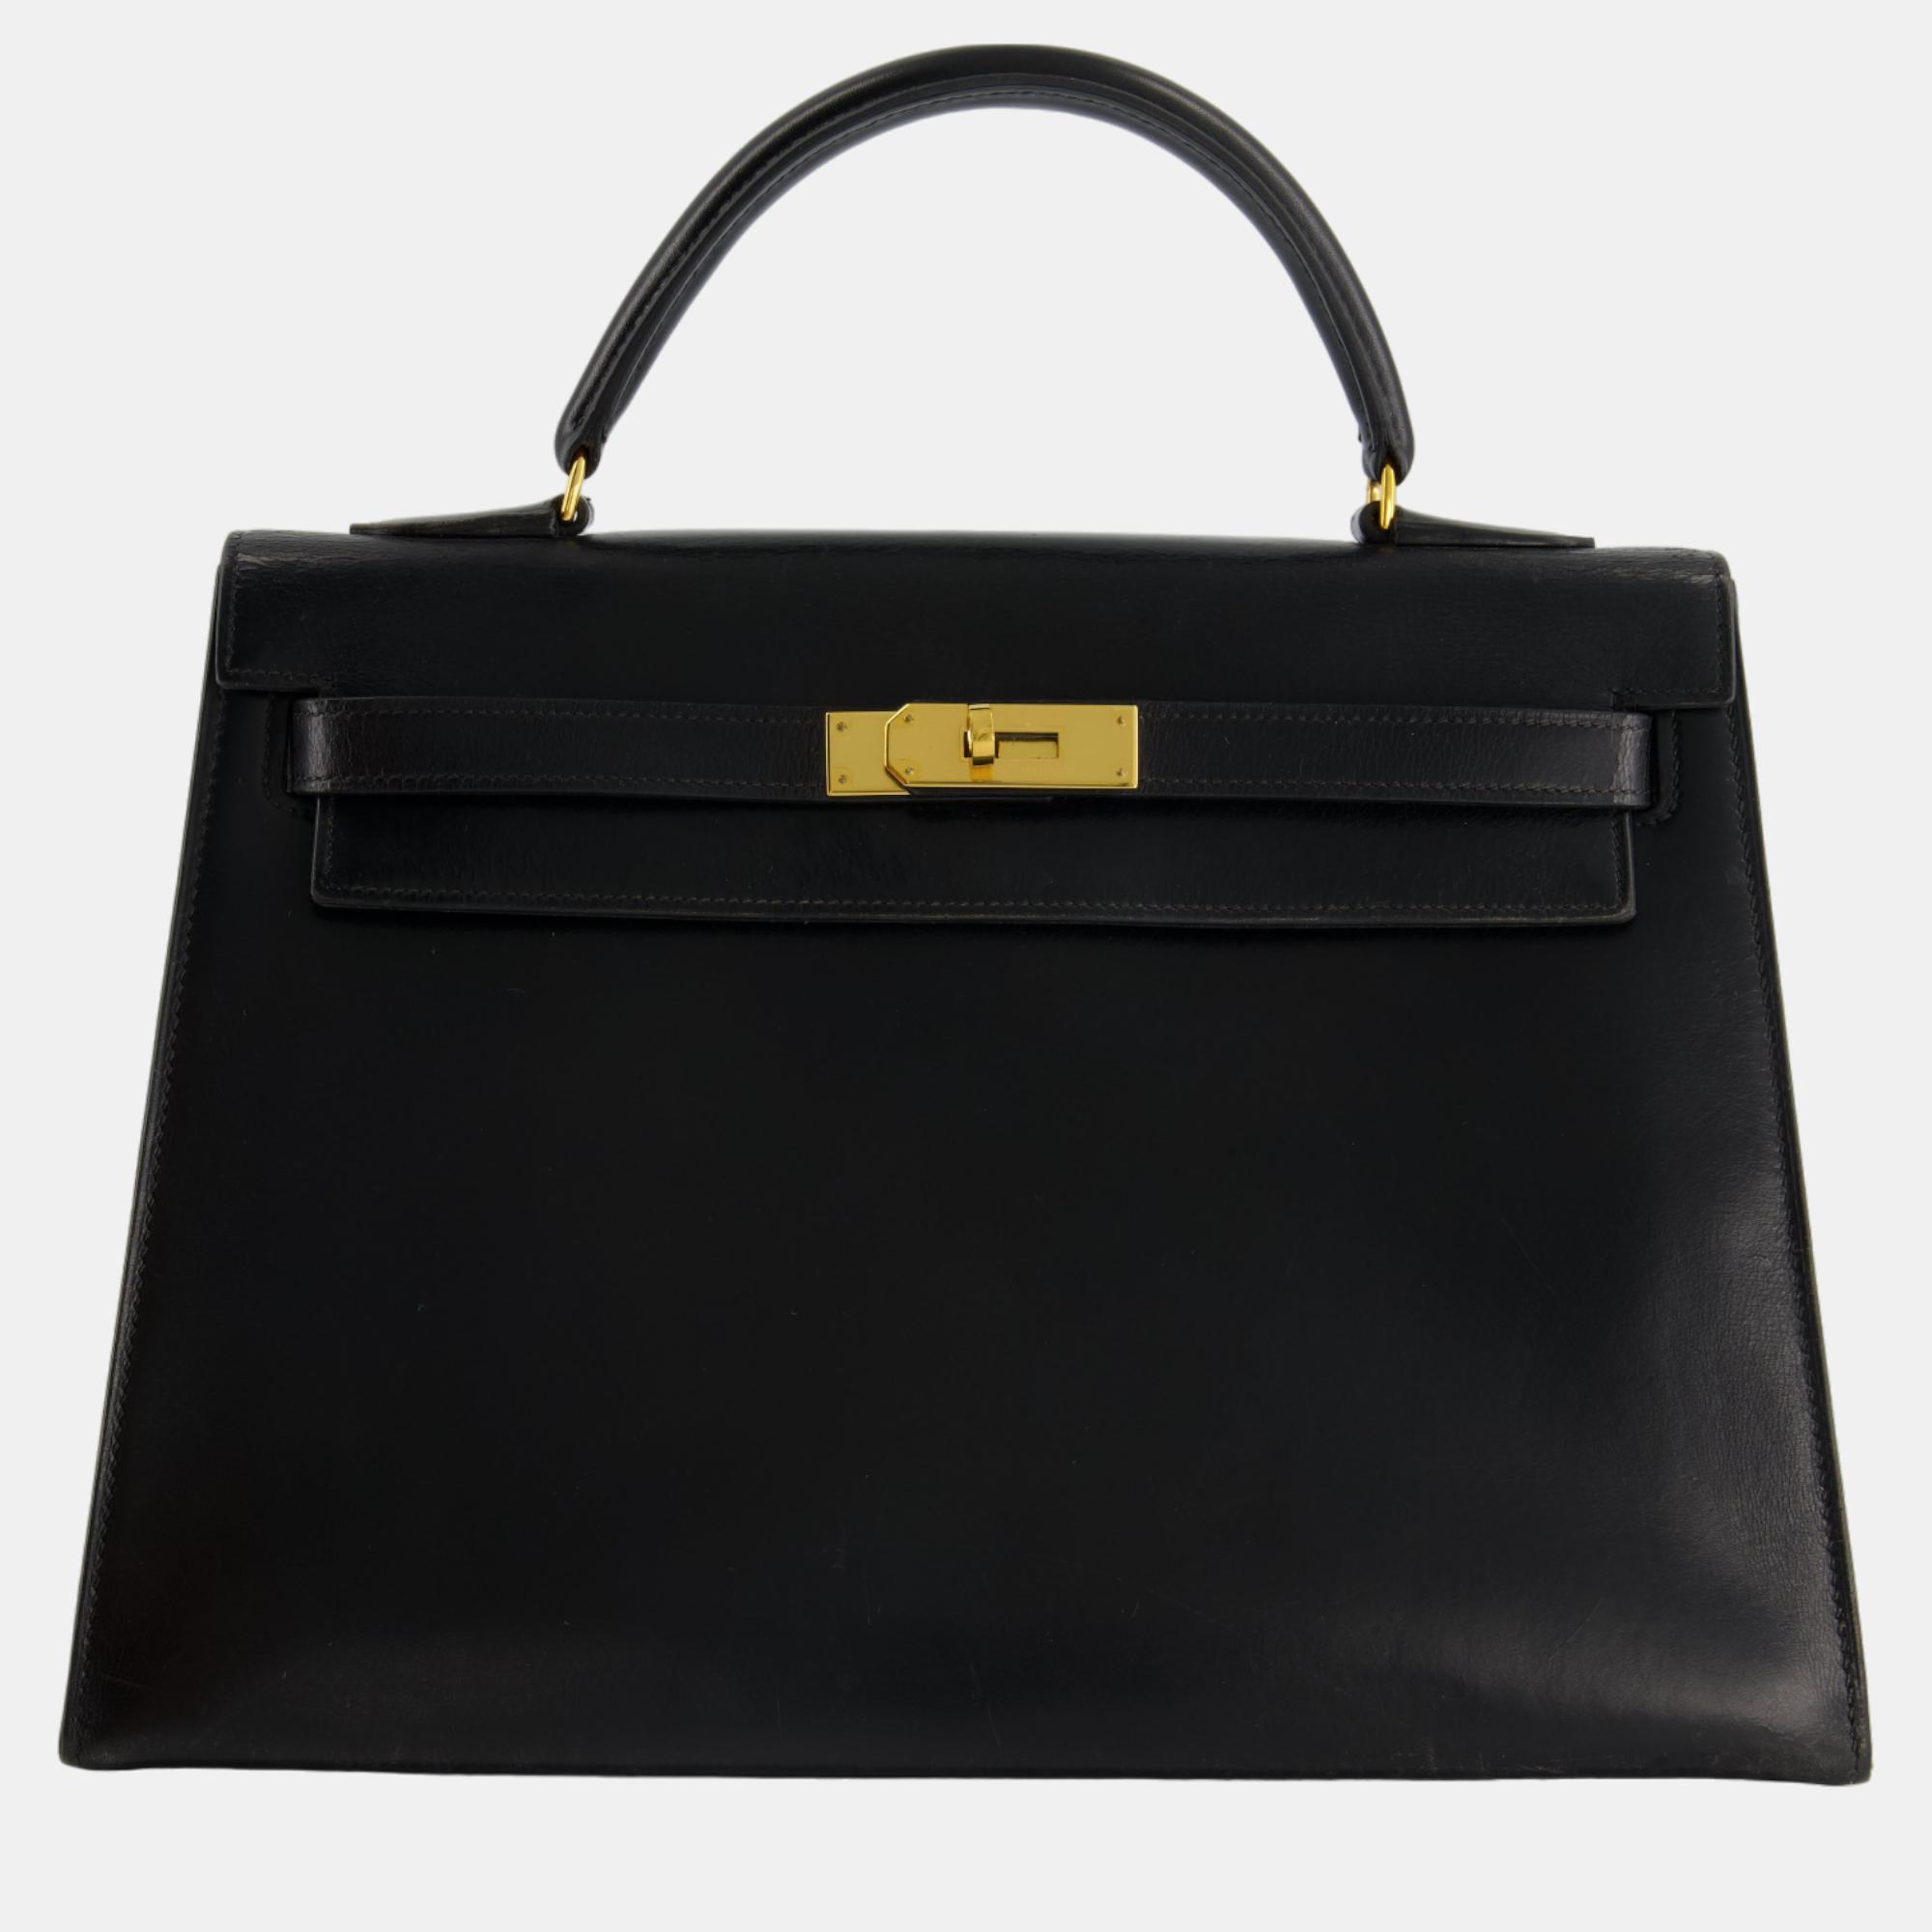 

Hermes Vintage Kelly Bag  in Black Box Calf Leather with Gold Hardware